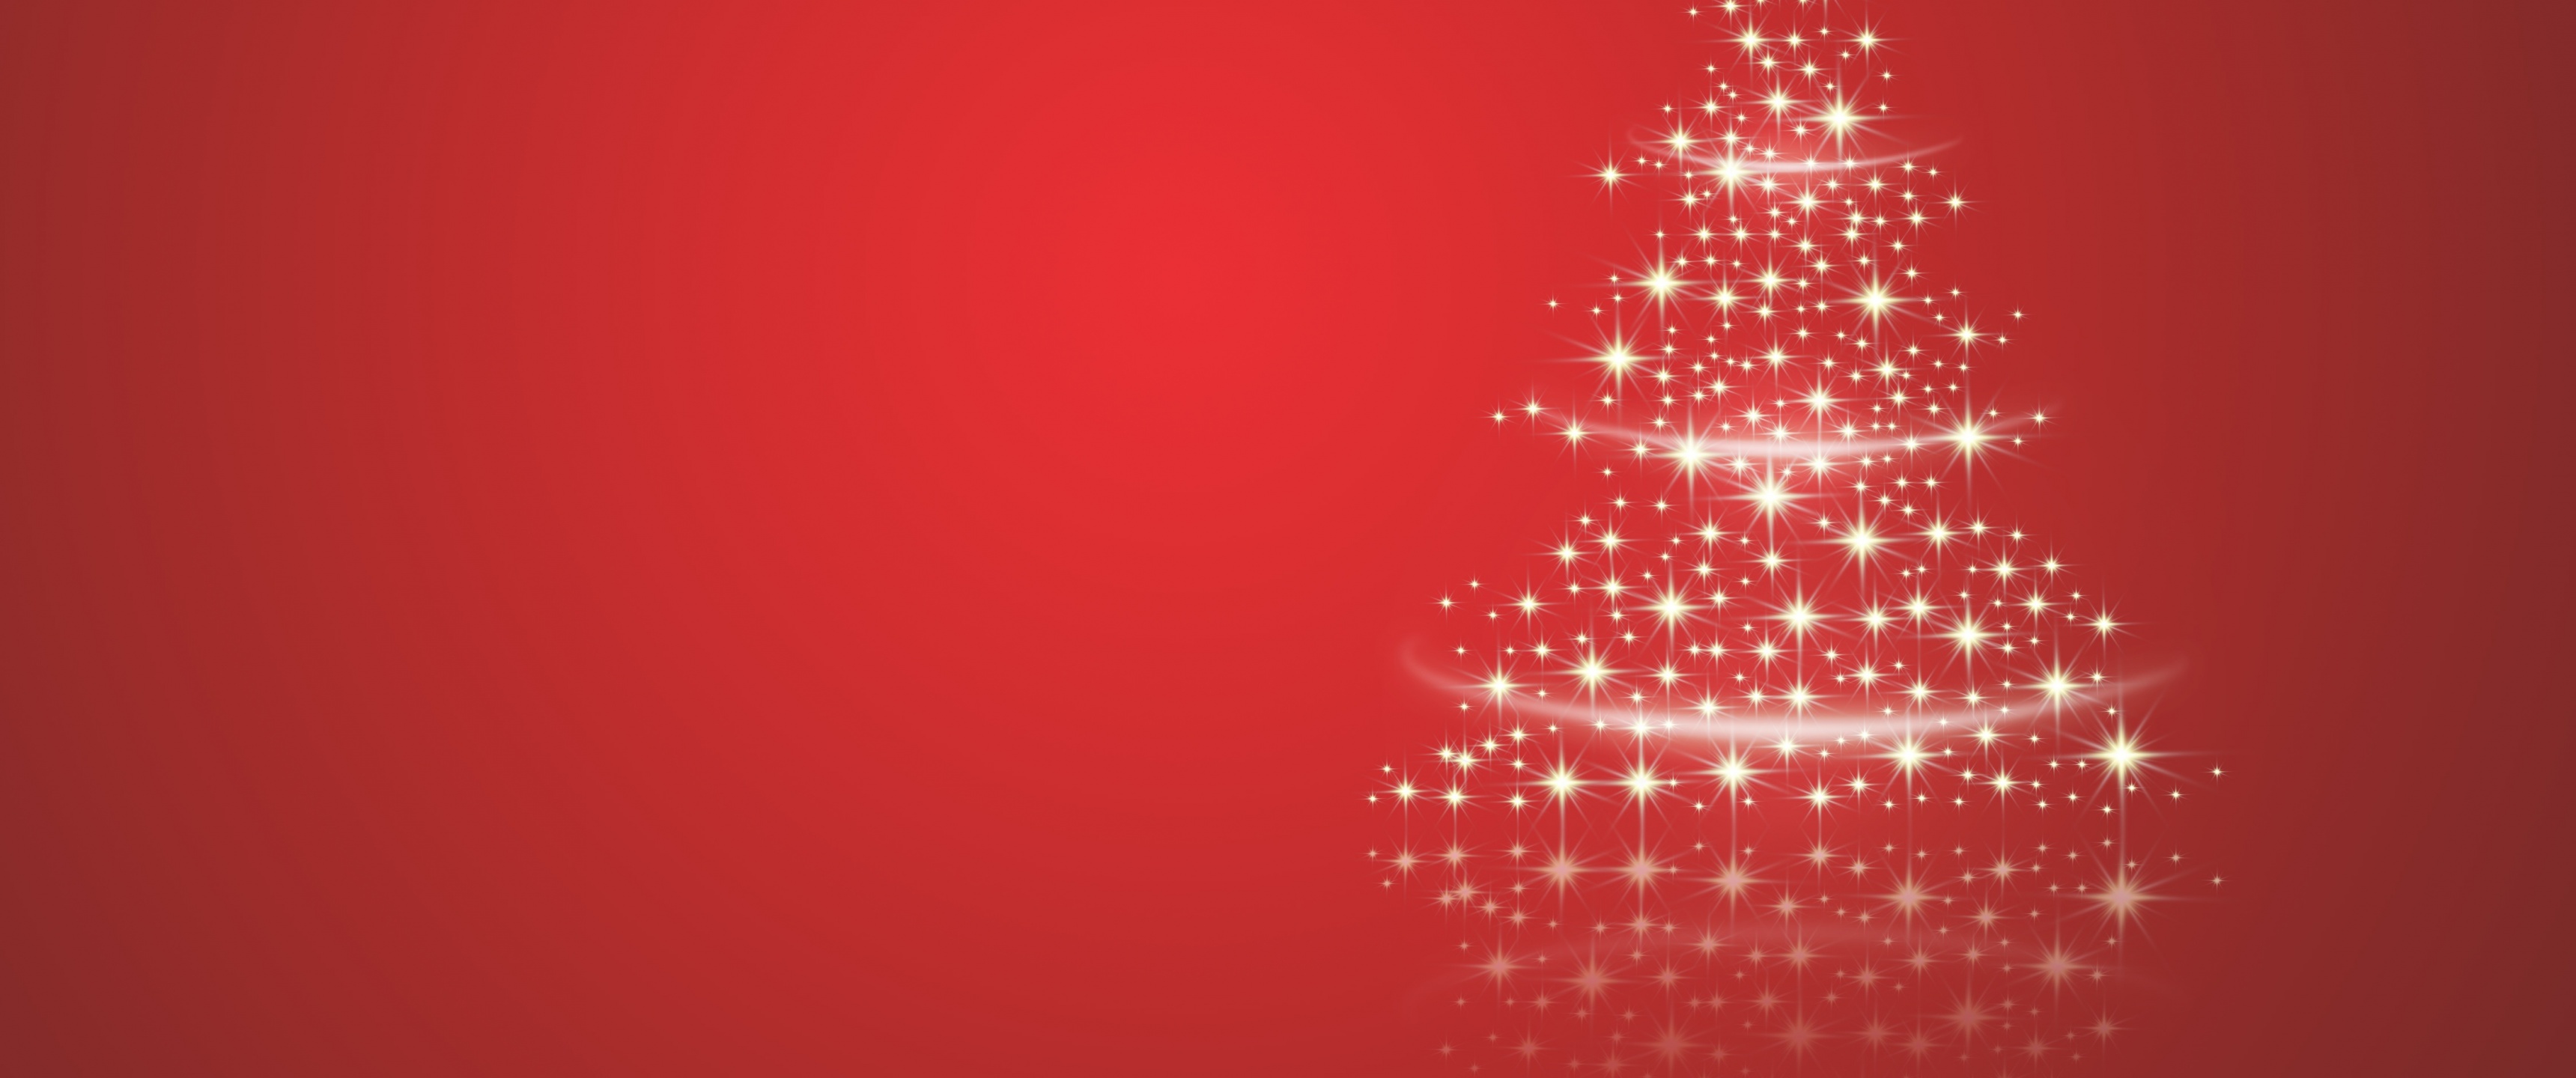 200 Red Christmas Background s  Wallpaperscom